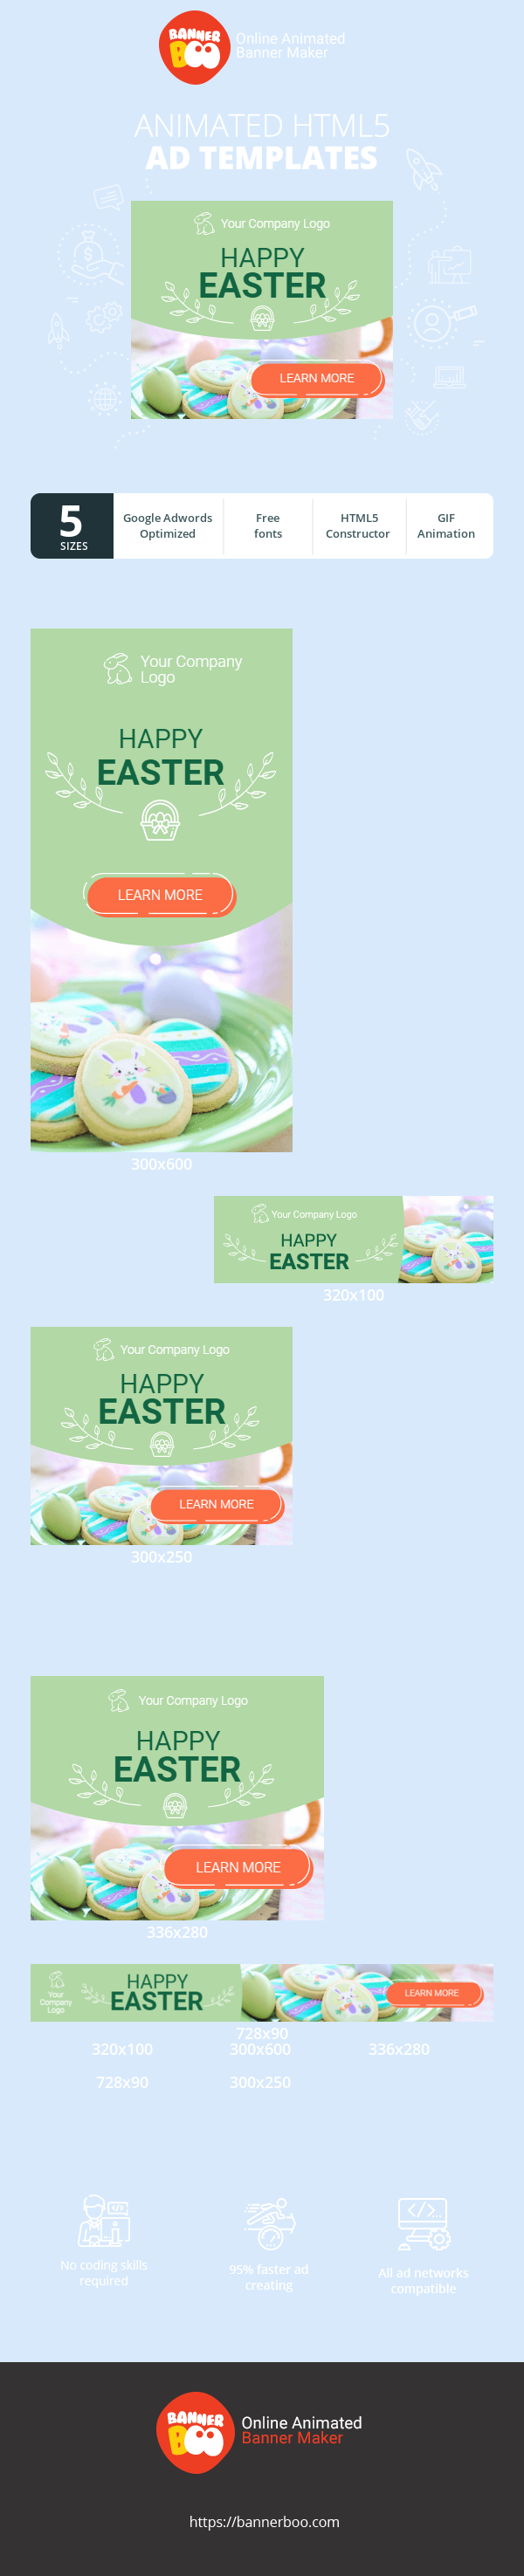 Banner ad template — Happy Easter!